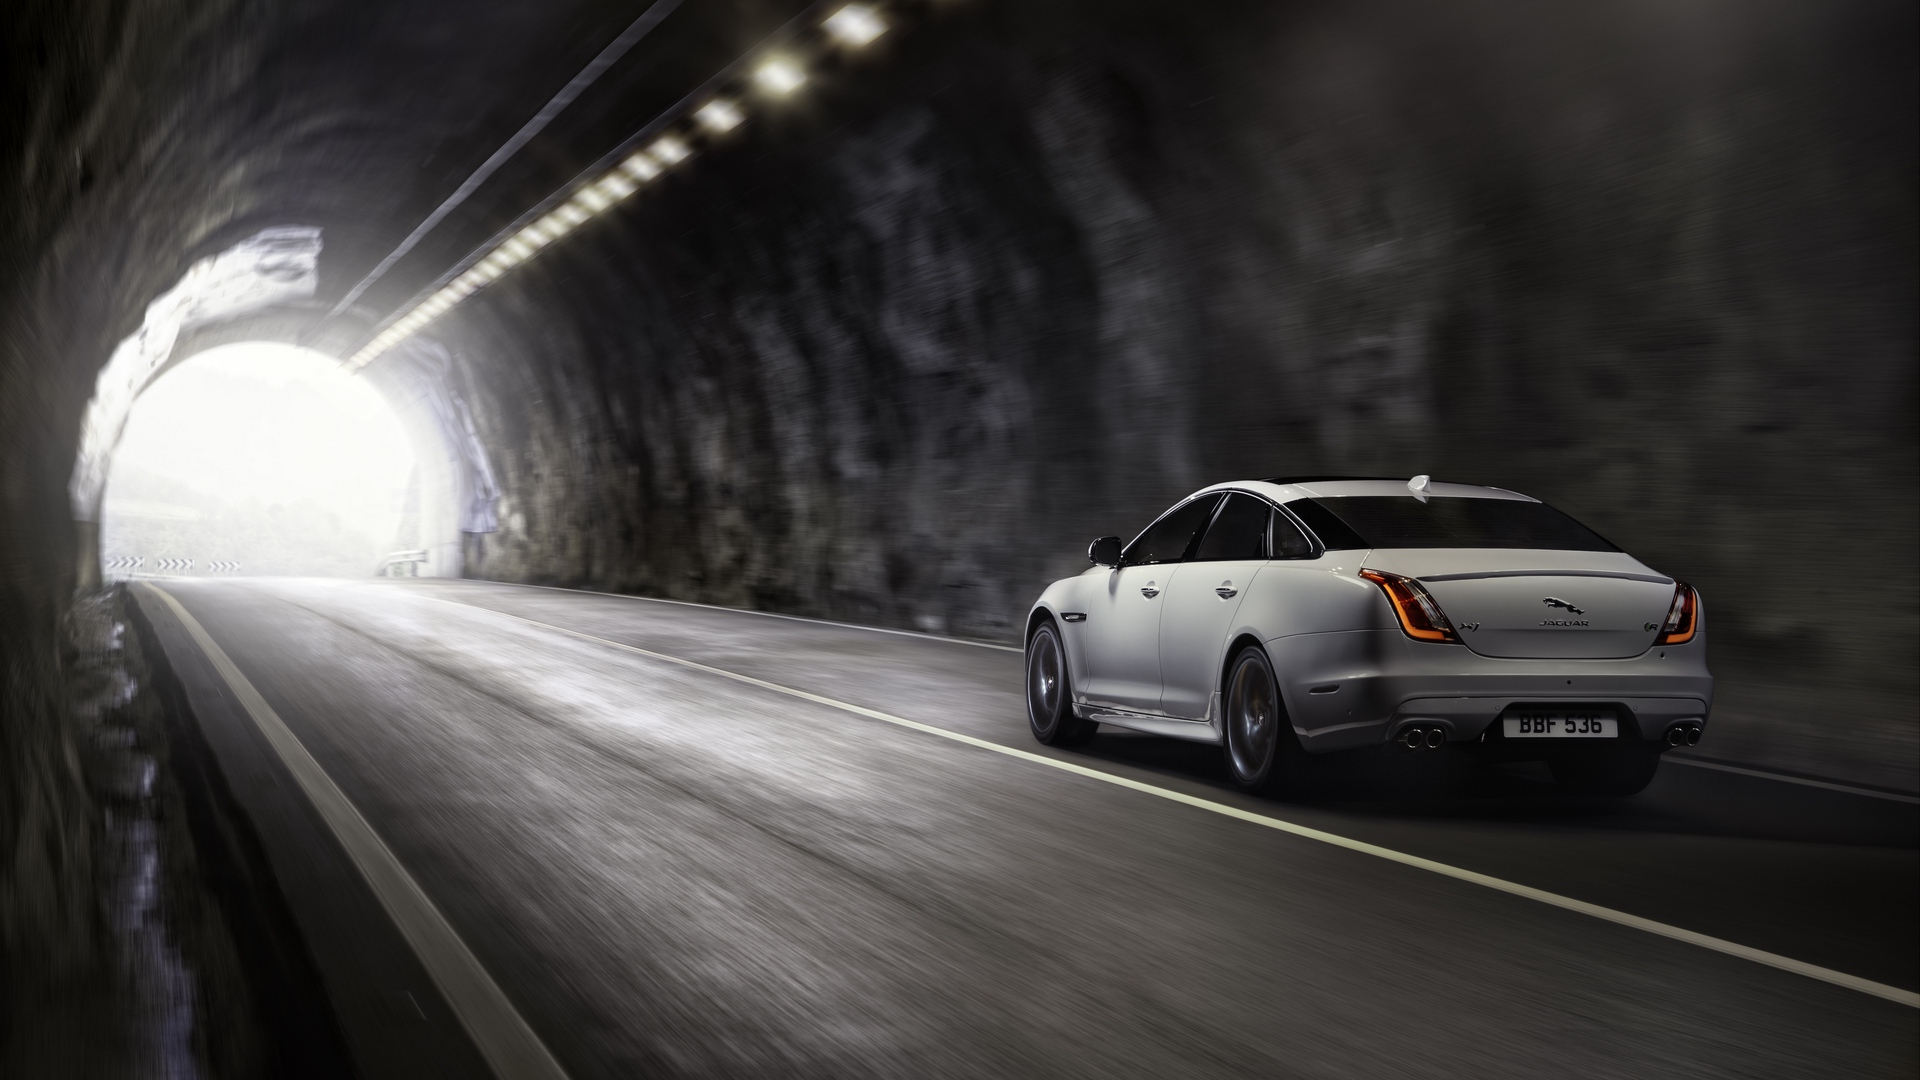 10 Jaguar XJ HD Wallpapers and Backgrounds